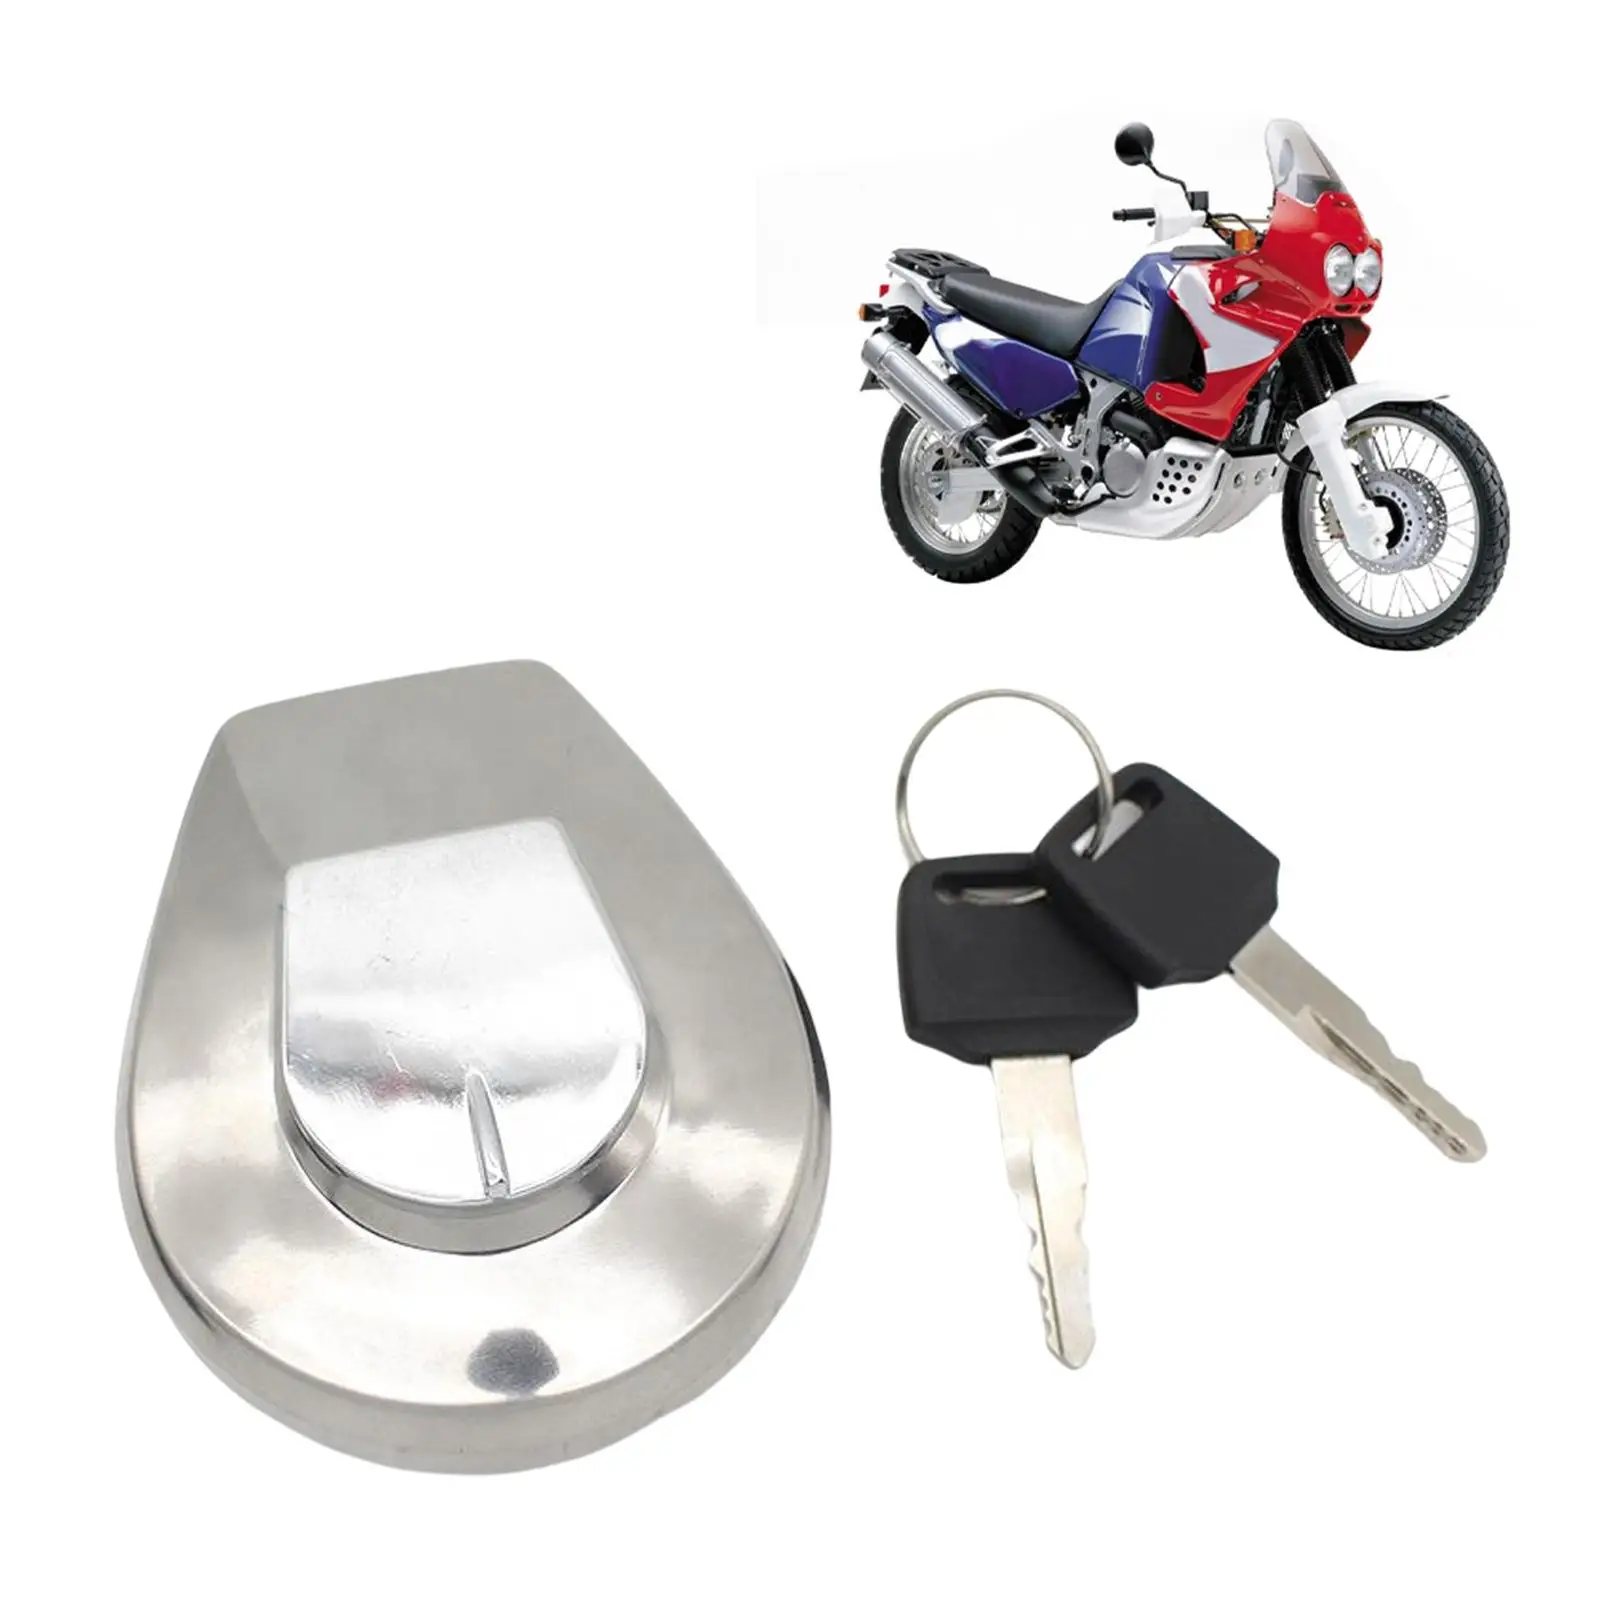 Oil Fuel Tank Gas Cap Cover with 2for Honda Vf750C CB250 GL1500CD